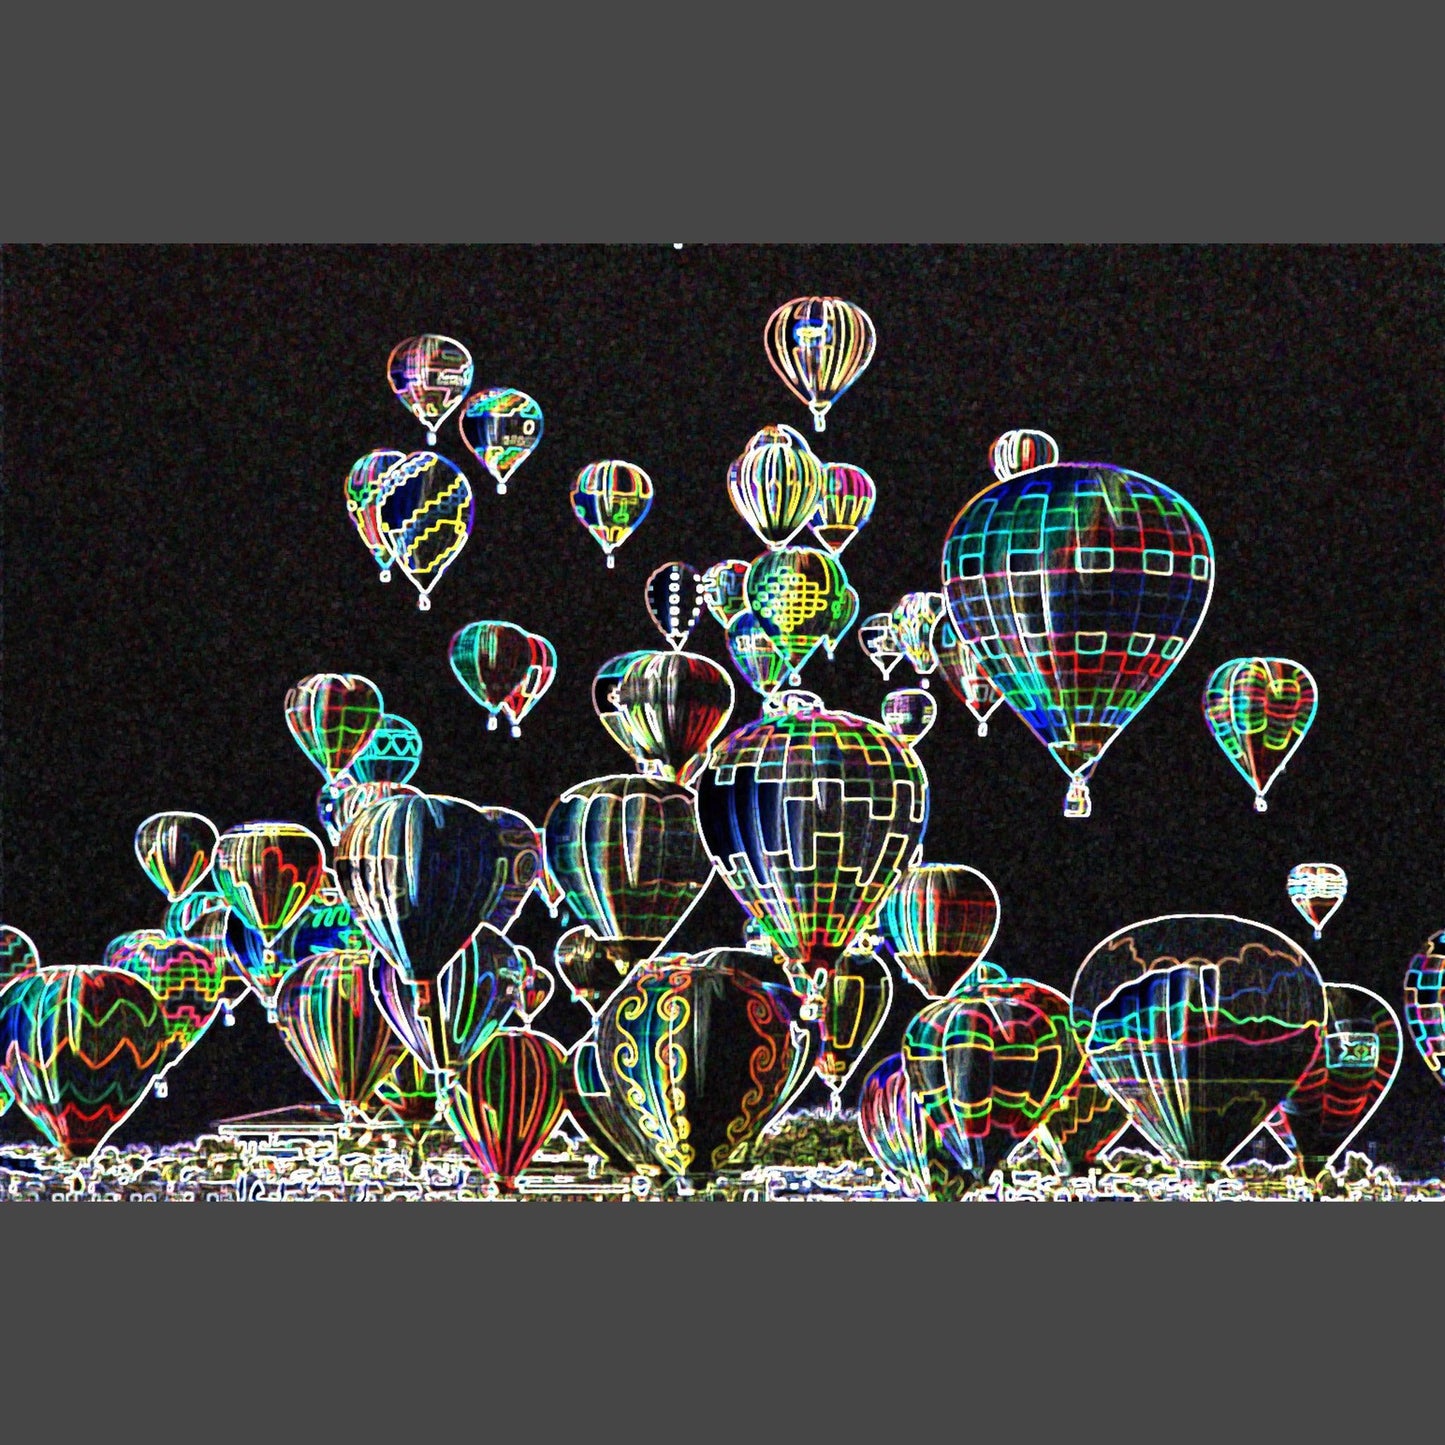 balloon-special-effect-1-v-isenhower-photography - V. Isenhower Photography